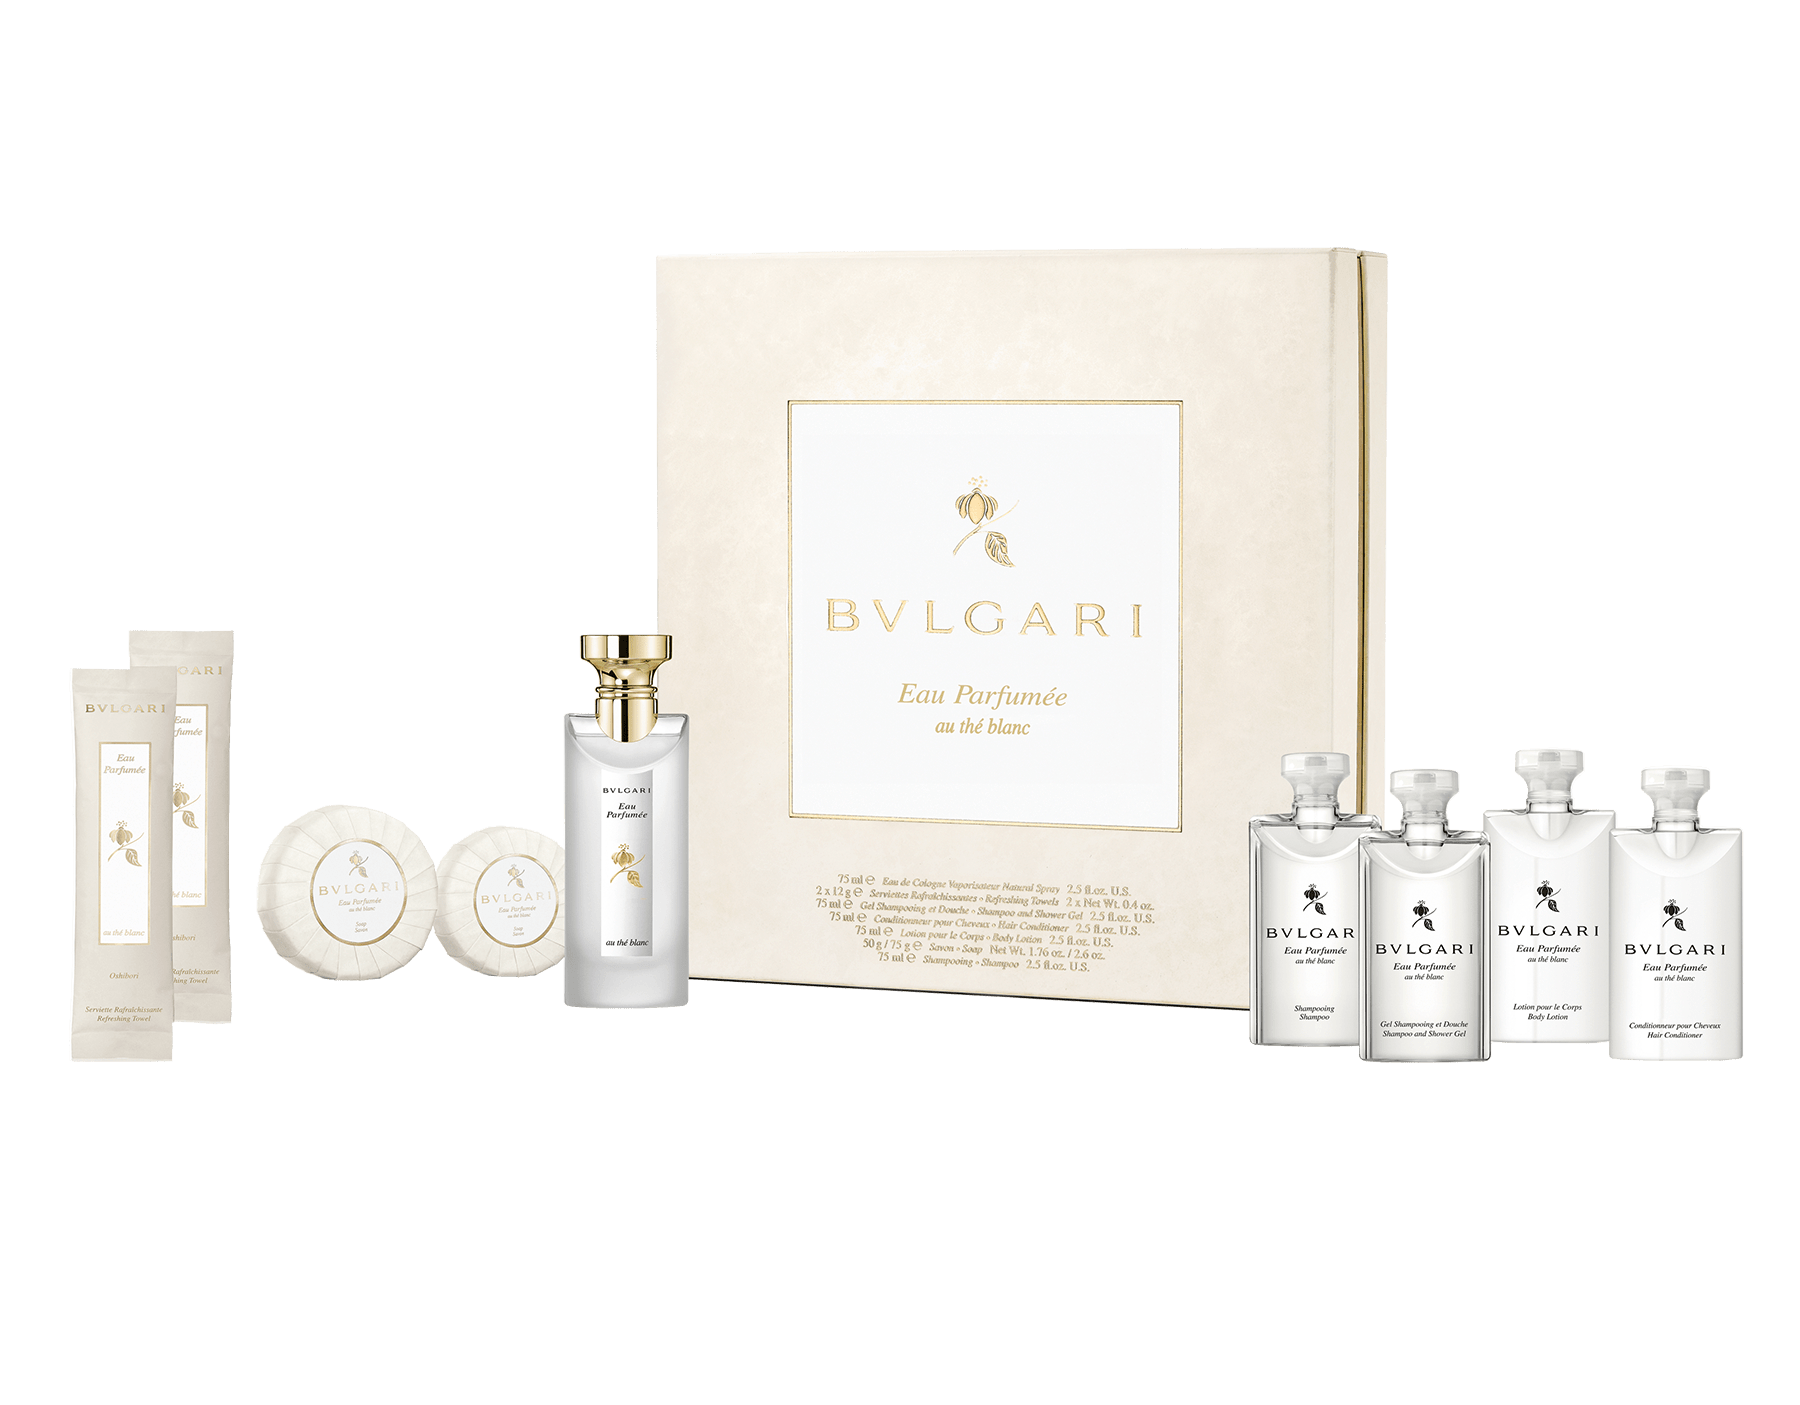 bvlgari products for hotels